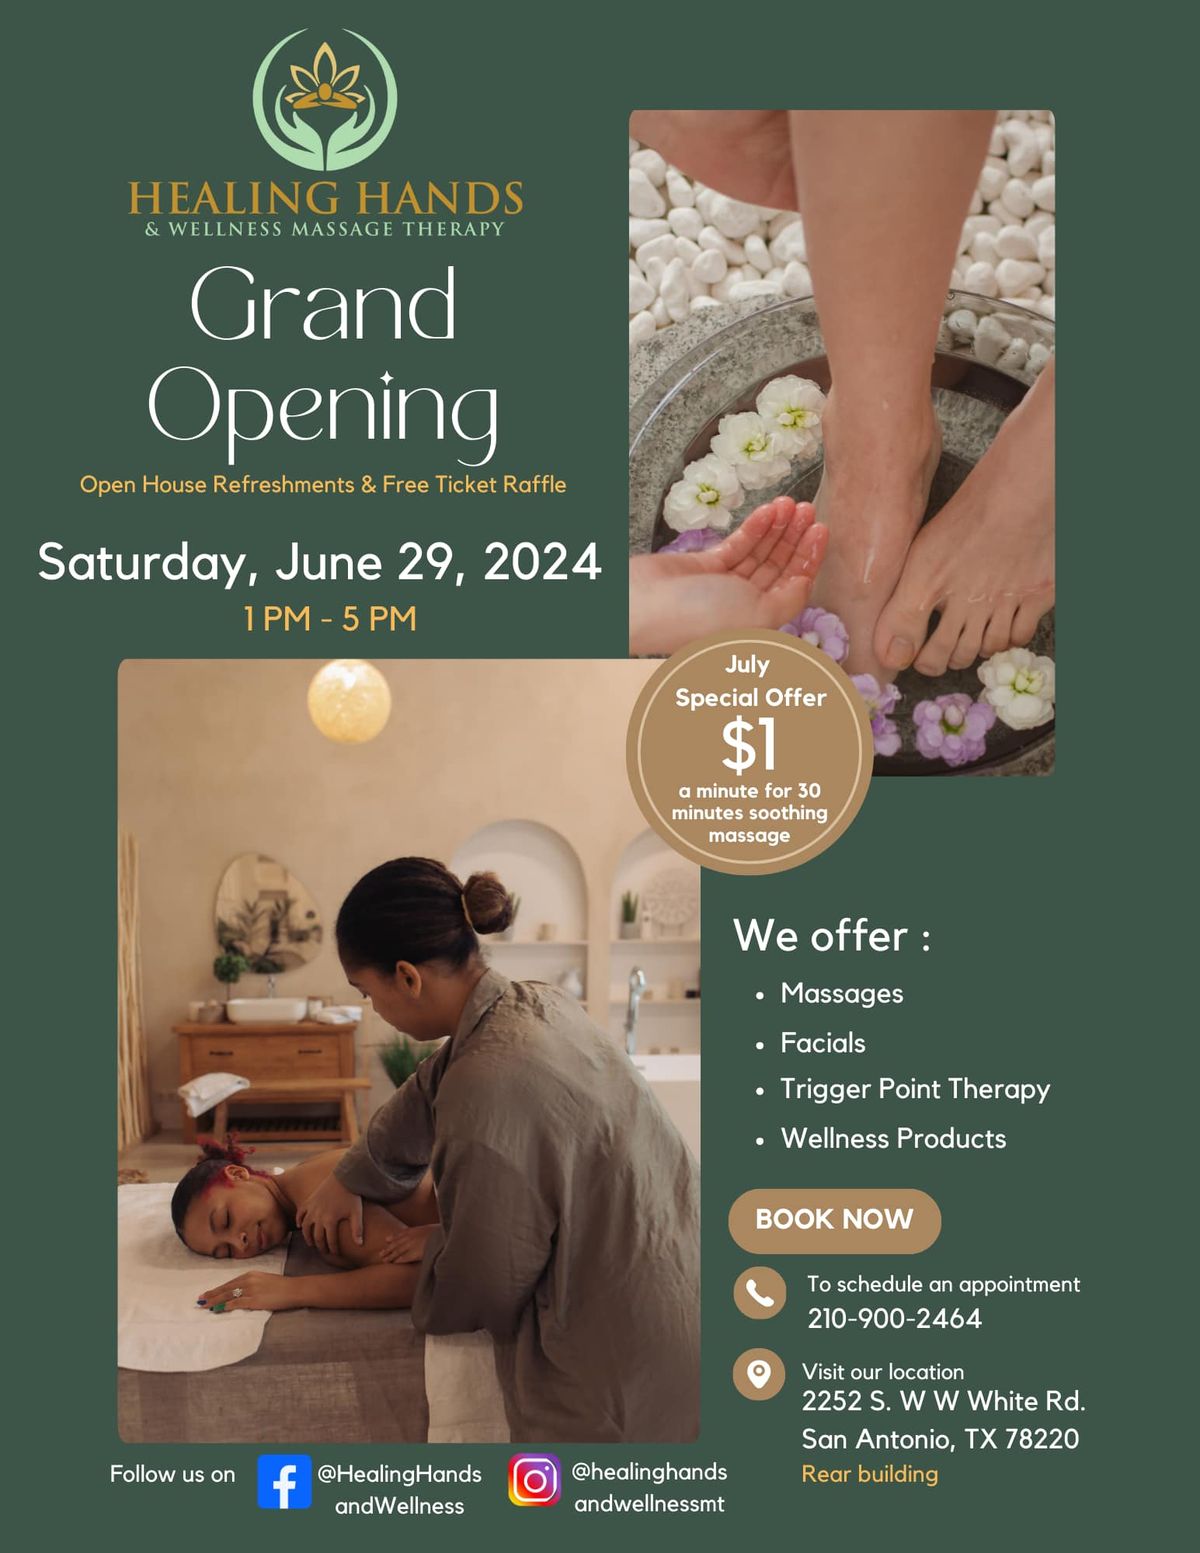 Healing Hands and Wellness Massage Therapy Grand Opening